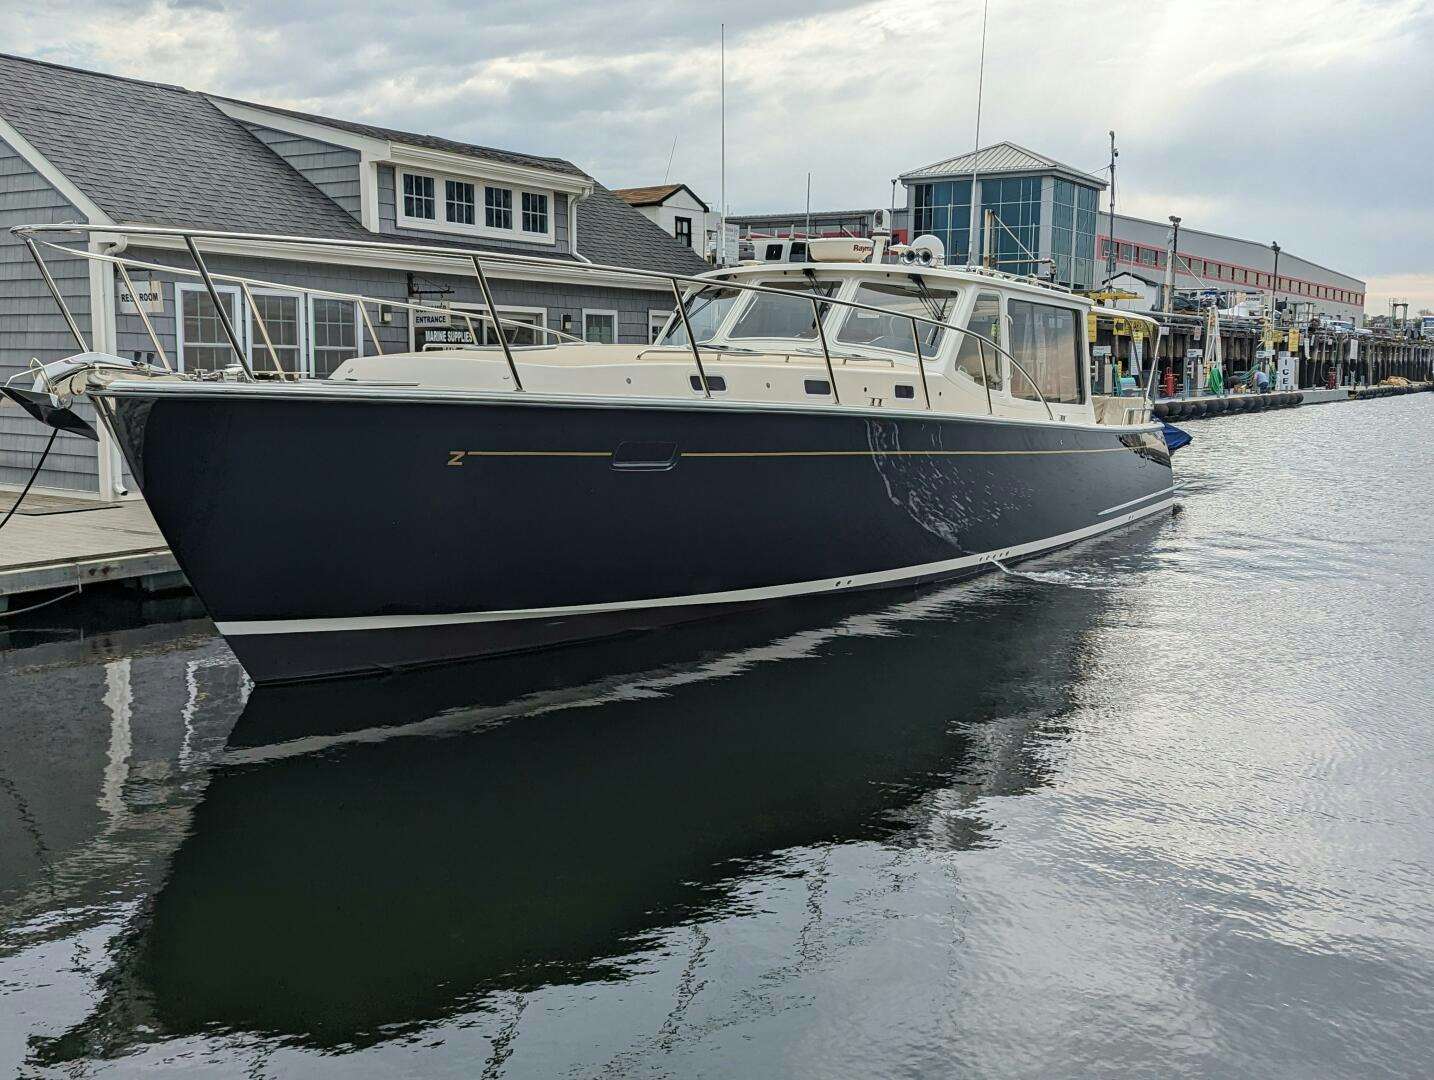 Southern cross
Yacht for Sale